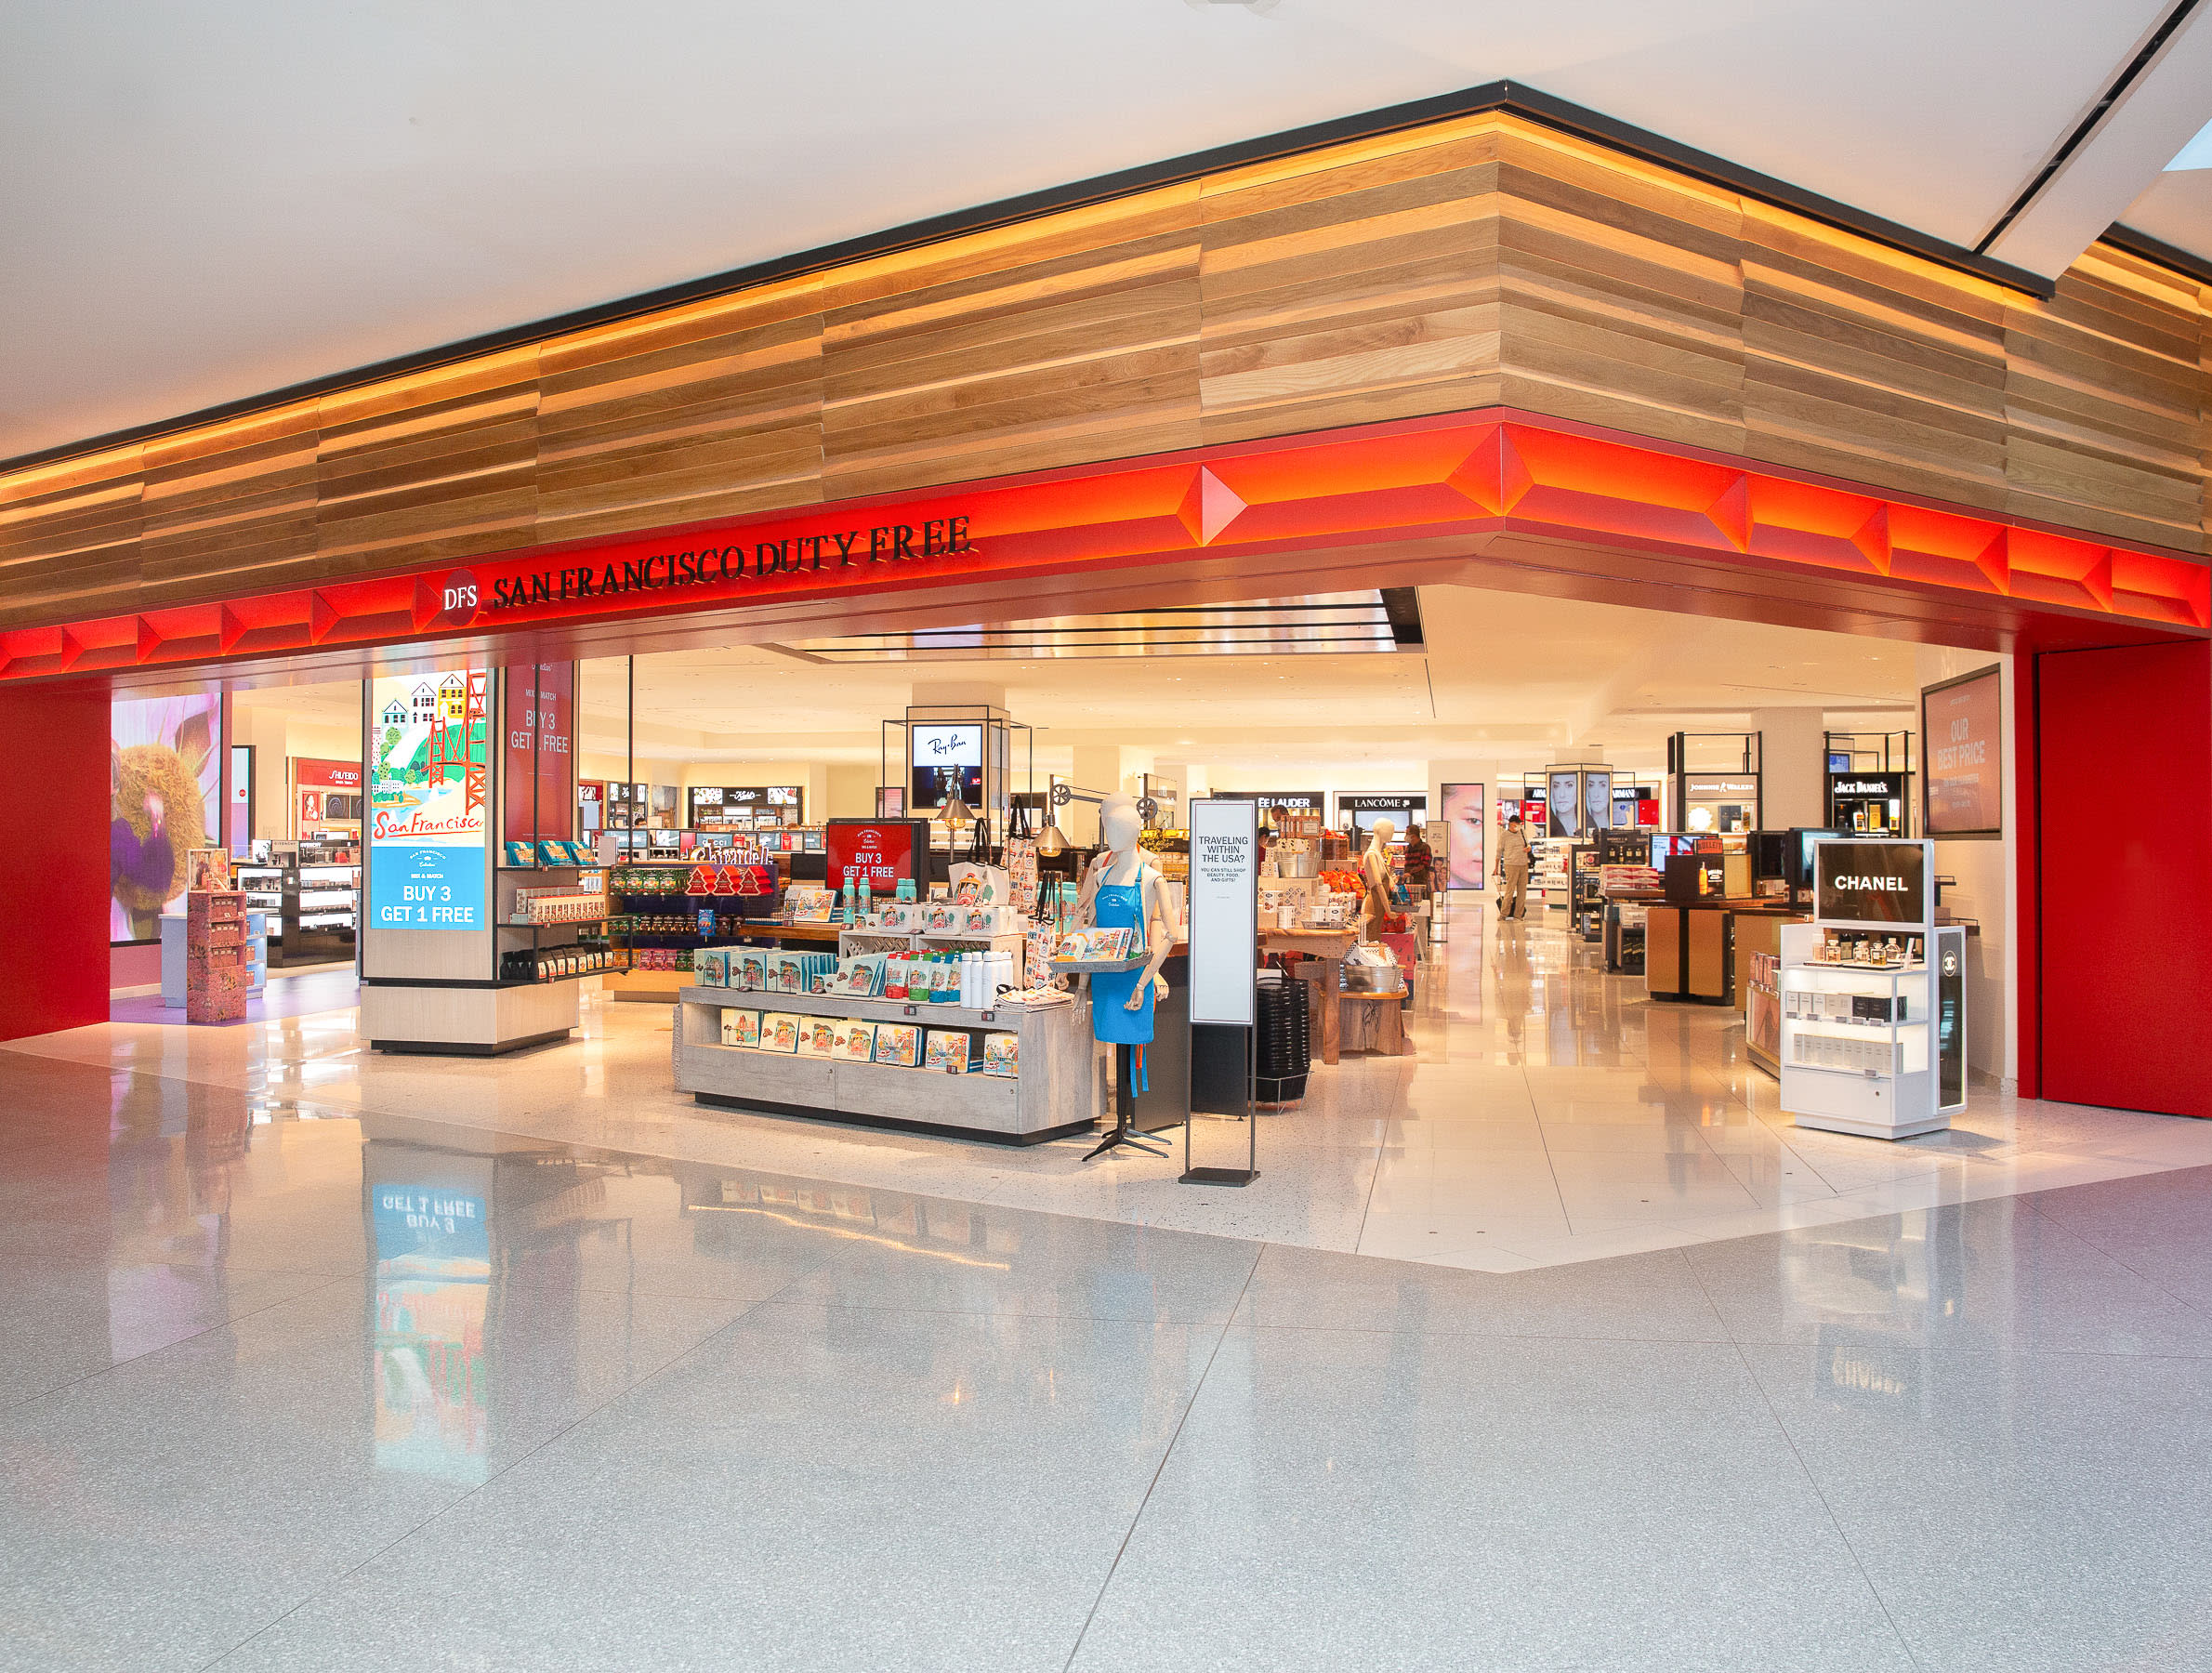 DFS Group completes HKIA duty-free upgrade - Inside Retail Asia